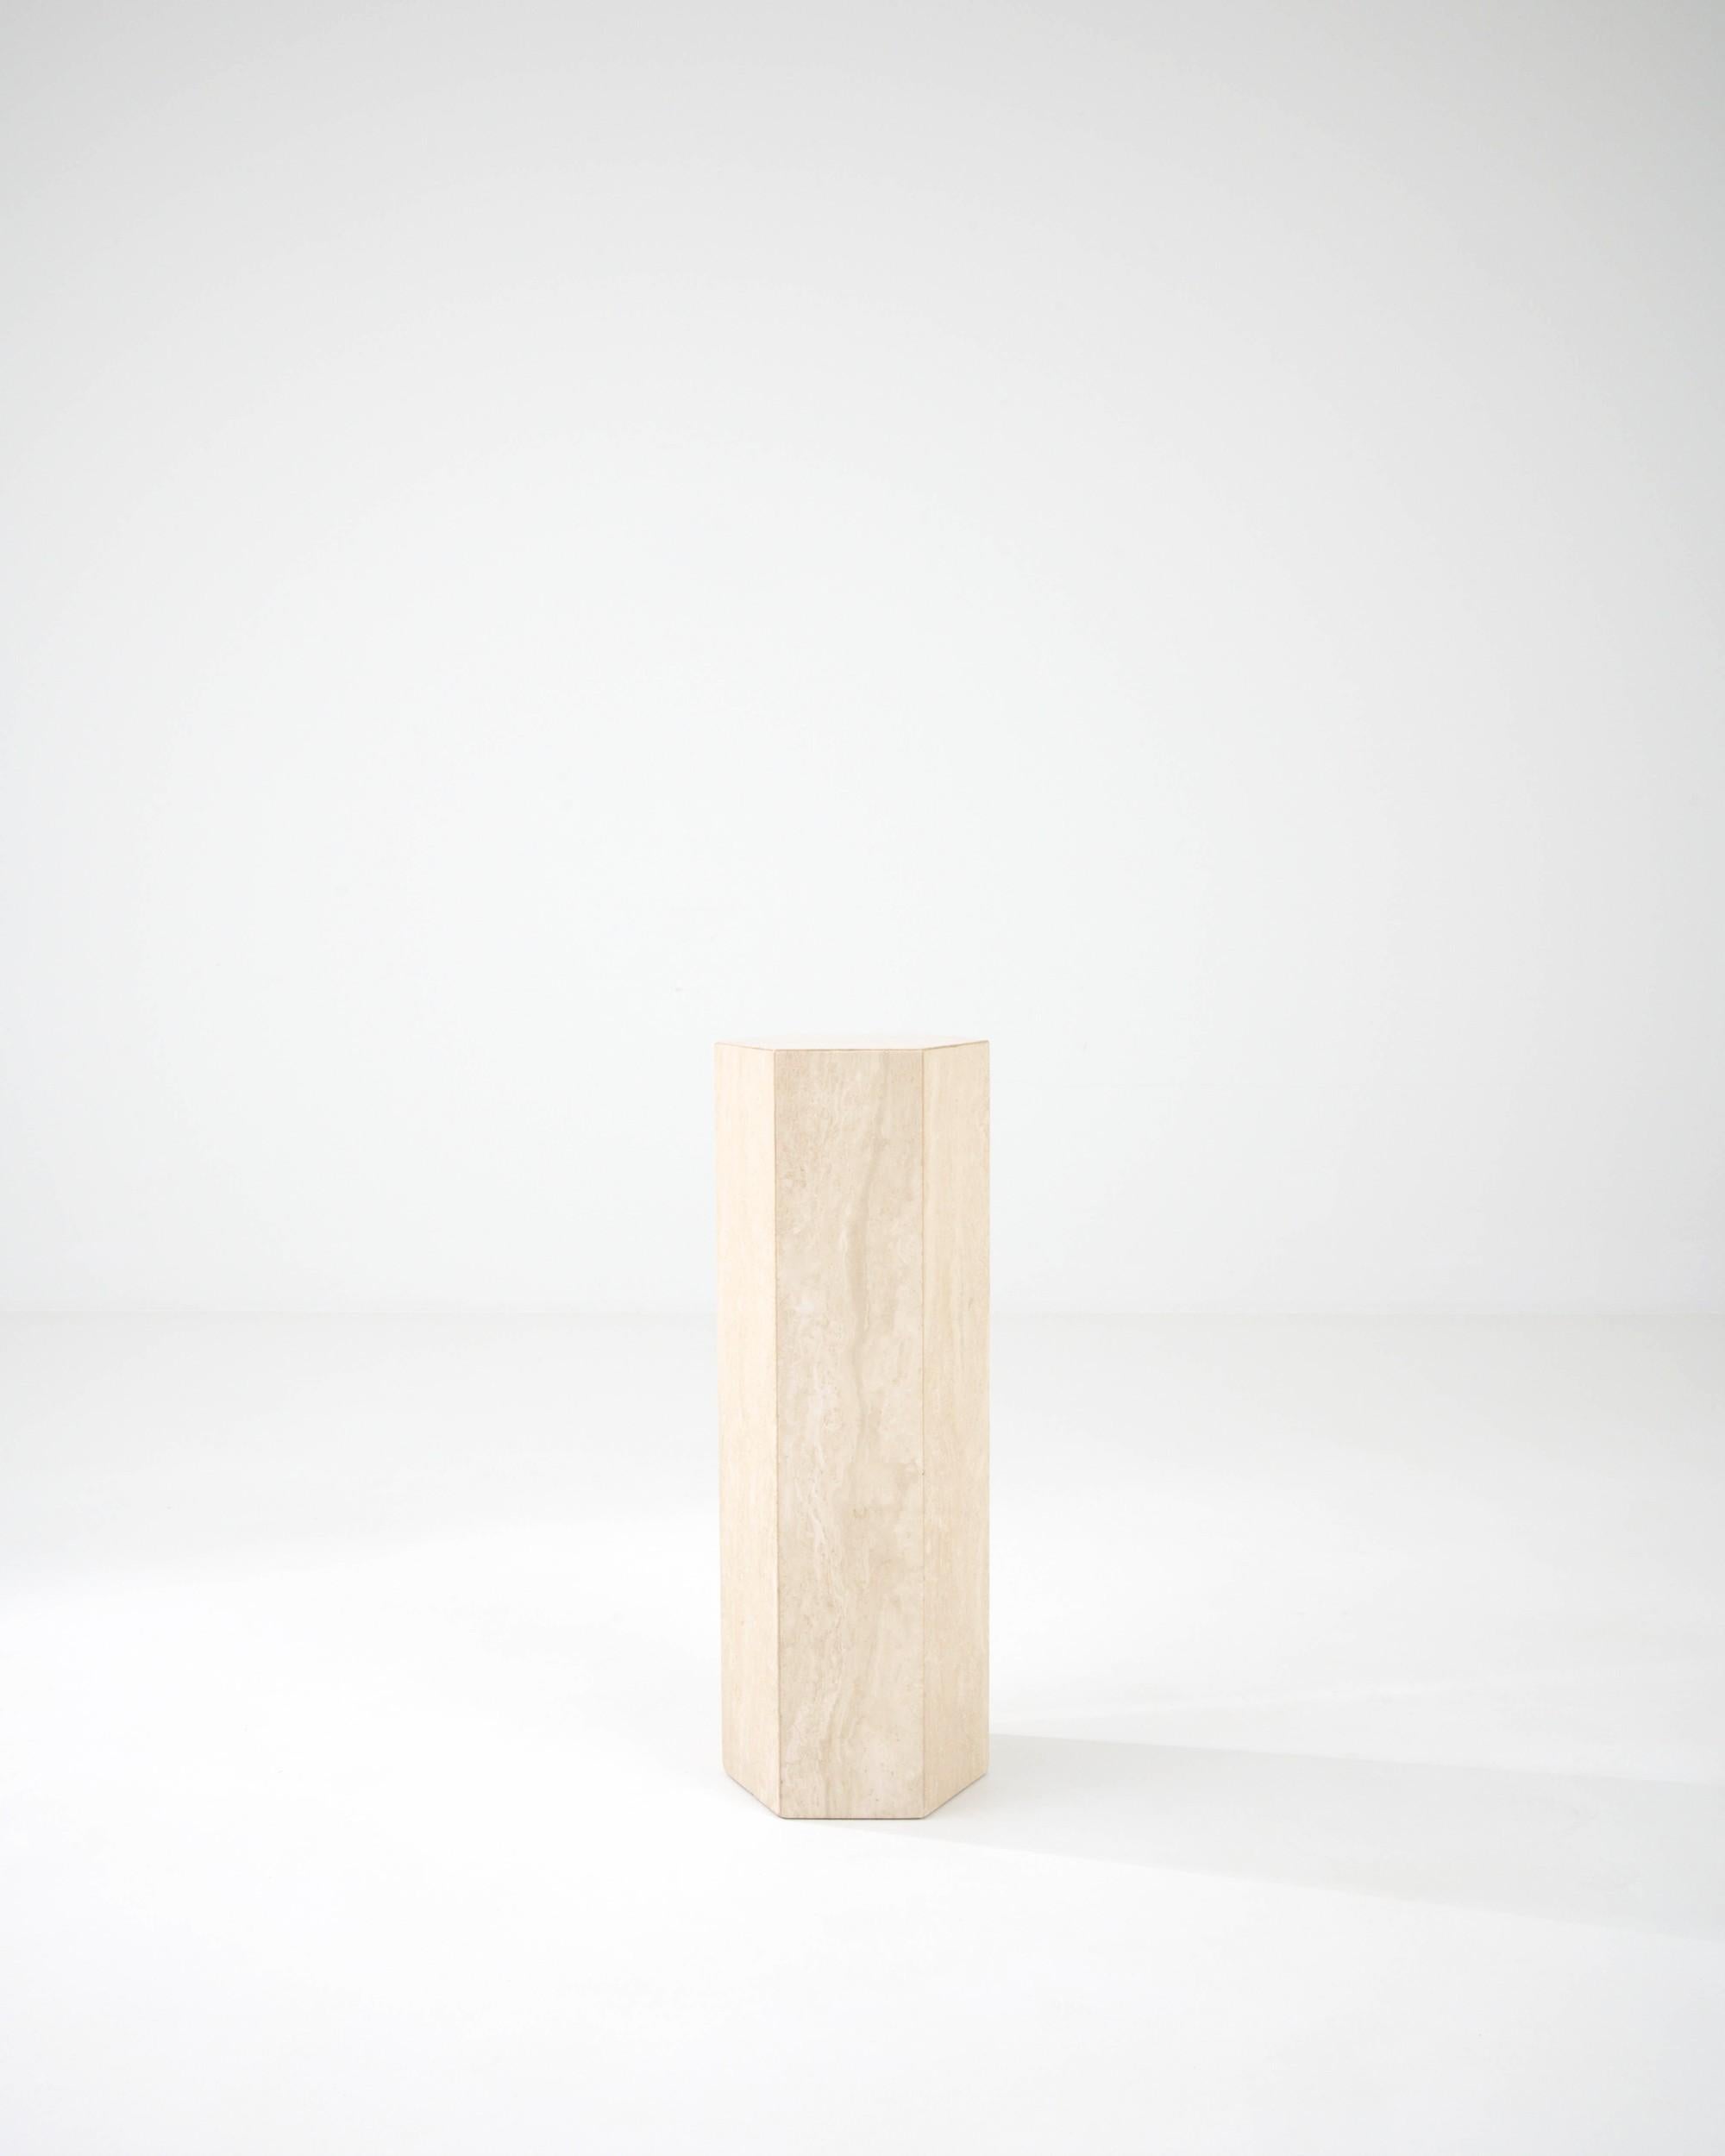 A marble pedestal made in 20th Century Italy. Elegant and understated, this stone pedestal makes an ideal base for elevating your favorite collectible. The minimal shape and neutral color have an unparalleled versatility, while the lavish travertine